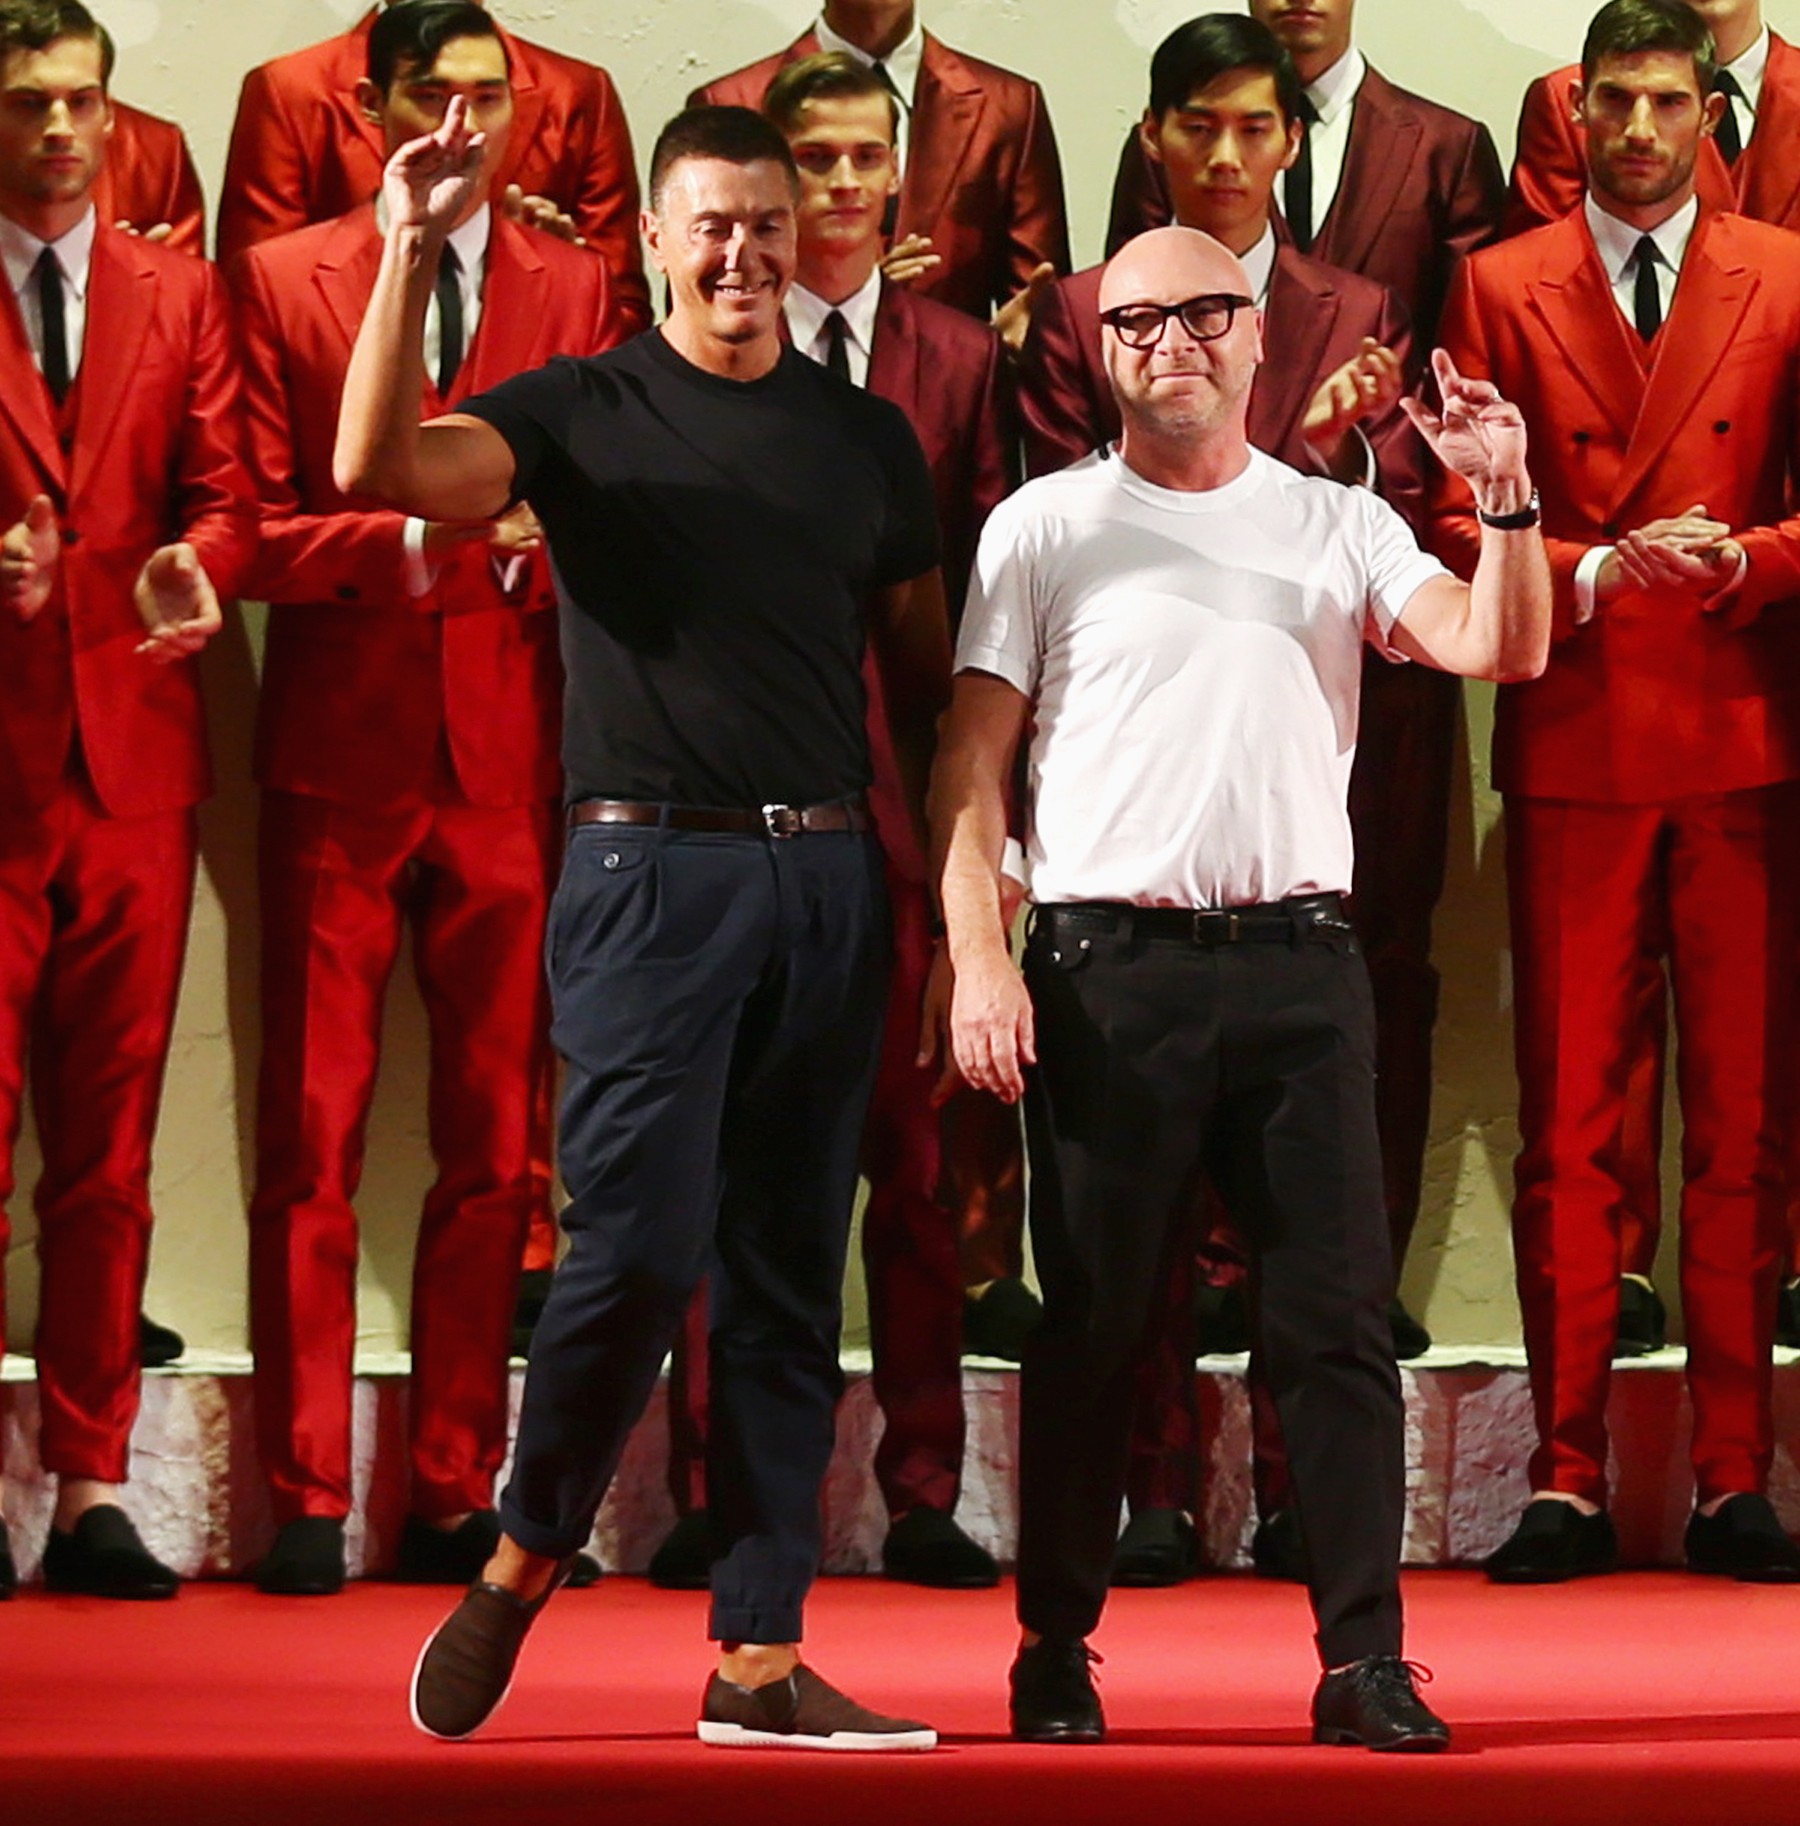 MILAN, ITALY - JUNE 21: Designers Stefano Gabbana and Domenico Dolce acknowledges the applause of the audience after the Dolce & Gabbana show as part of Milan Fashion Week Menswear Spring/Summer 2015 on June 21, 2014 in Milan, Italy. (Photo by Vittorio (Foto: Getty Images)